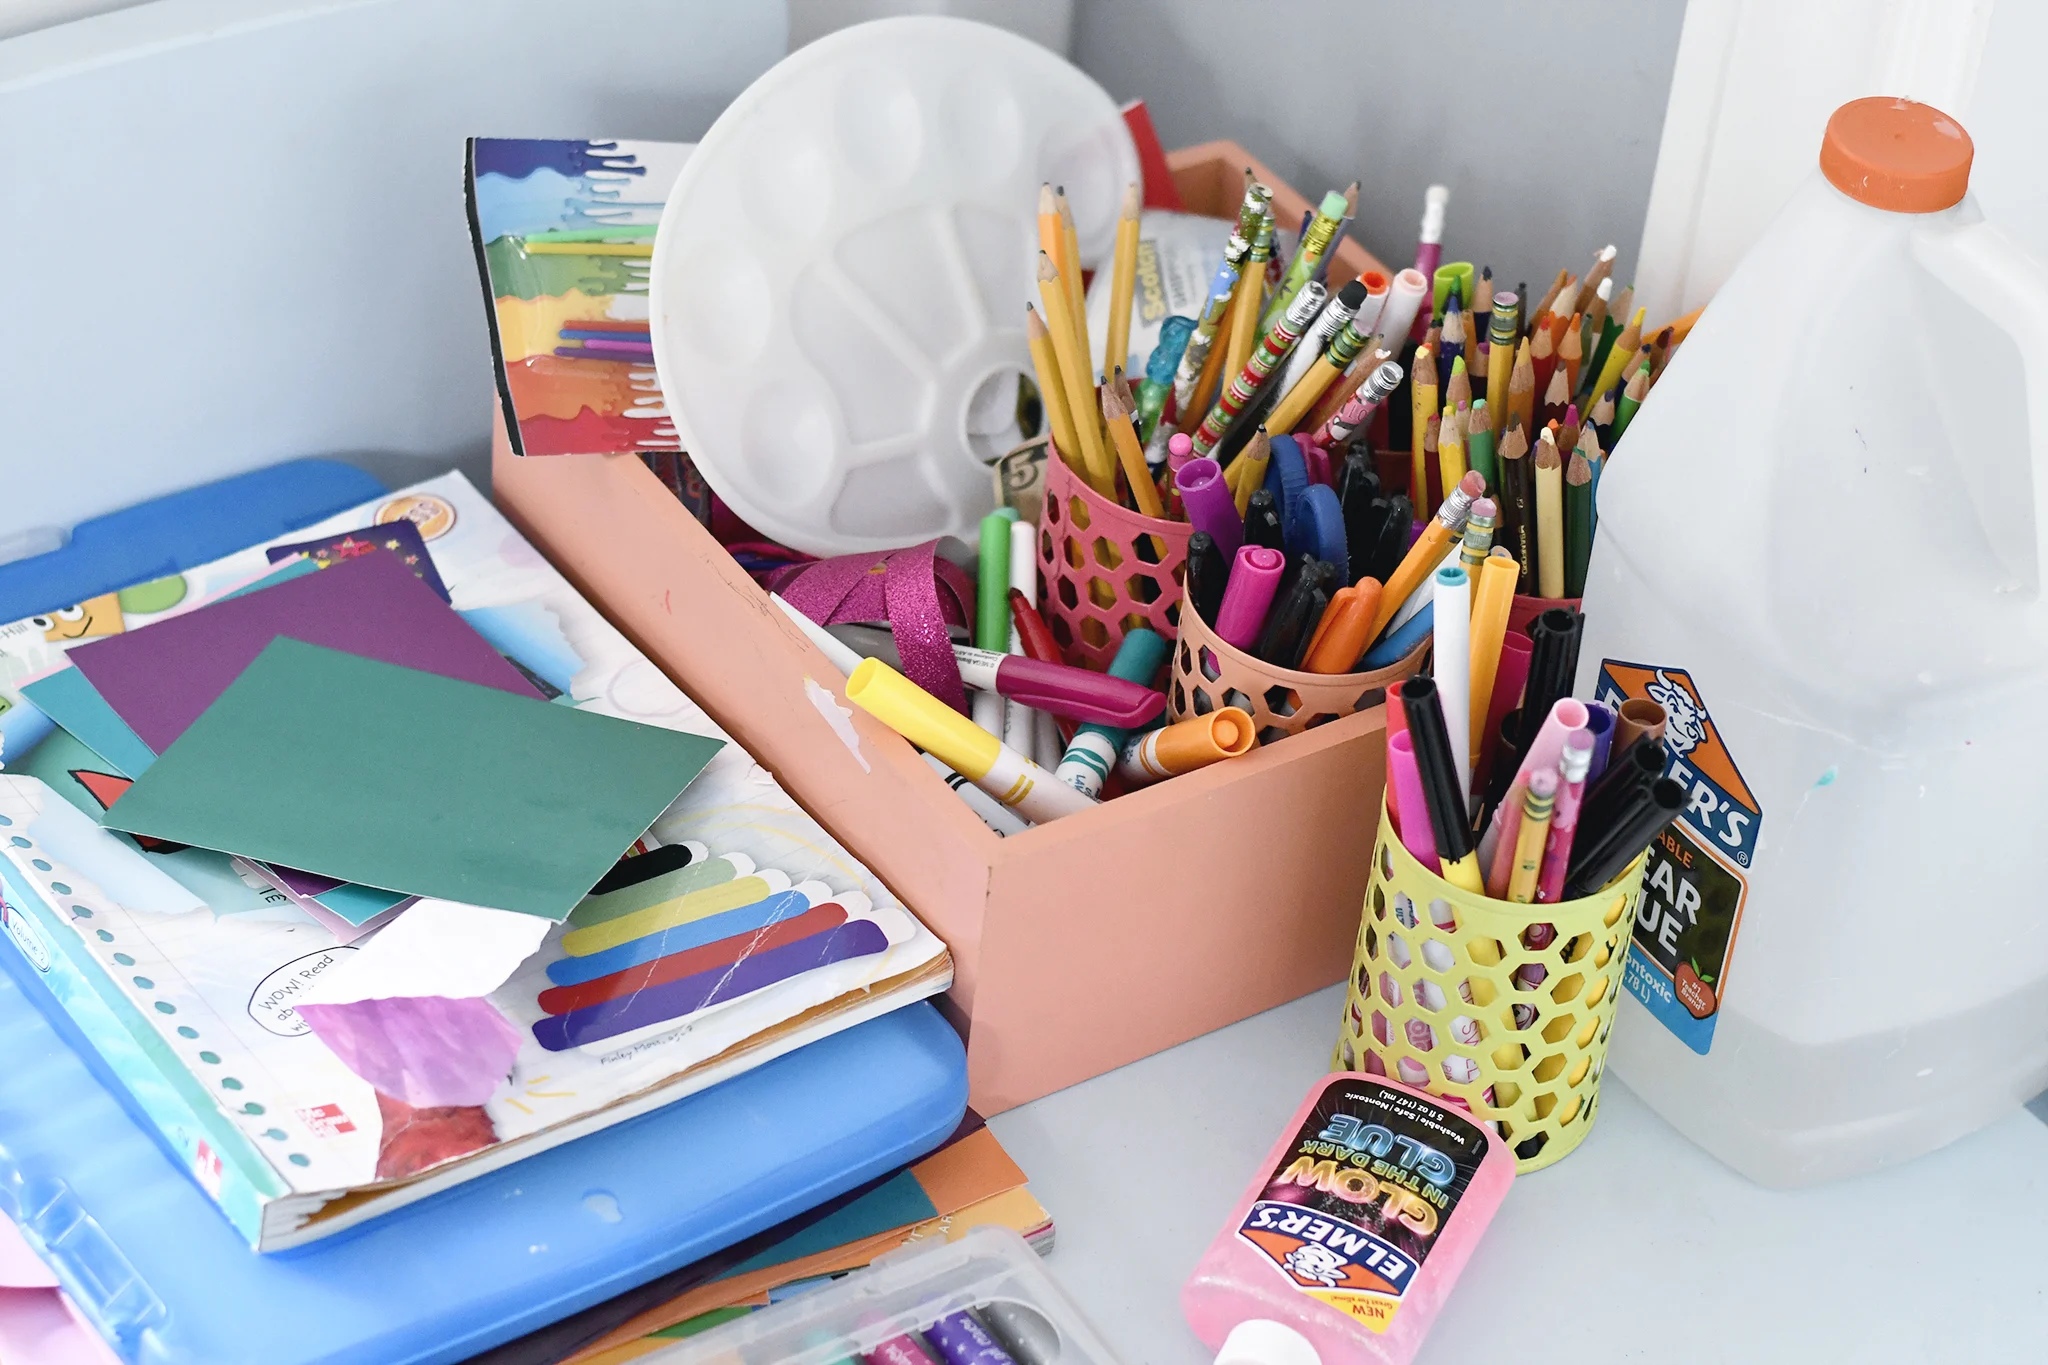 Don't let a messy kids art space take over your life!